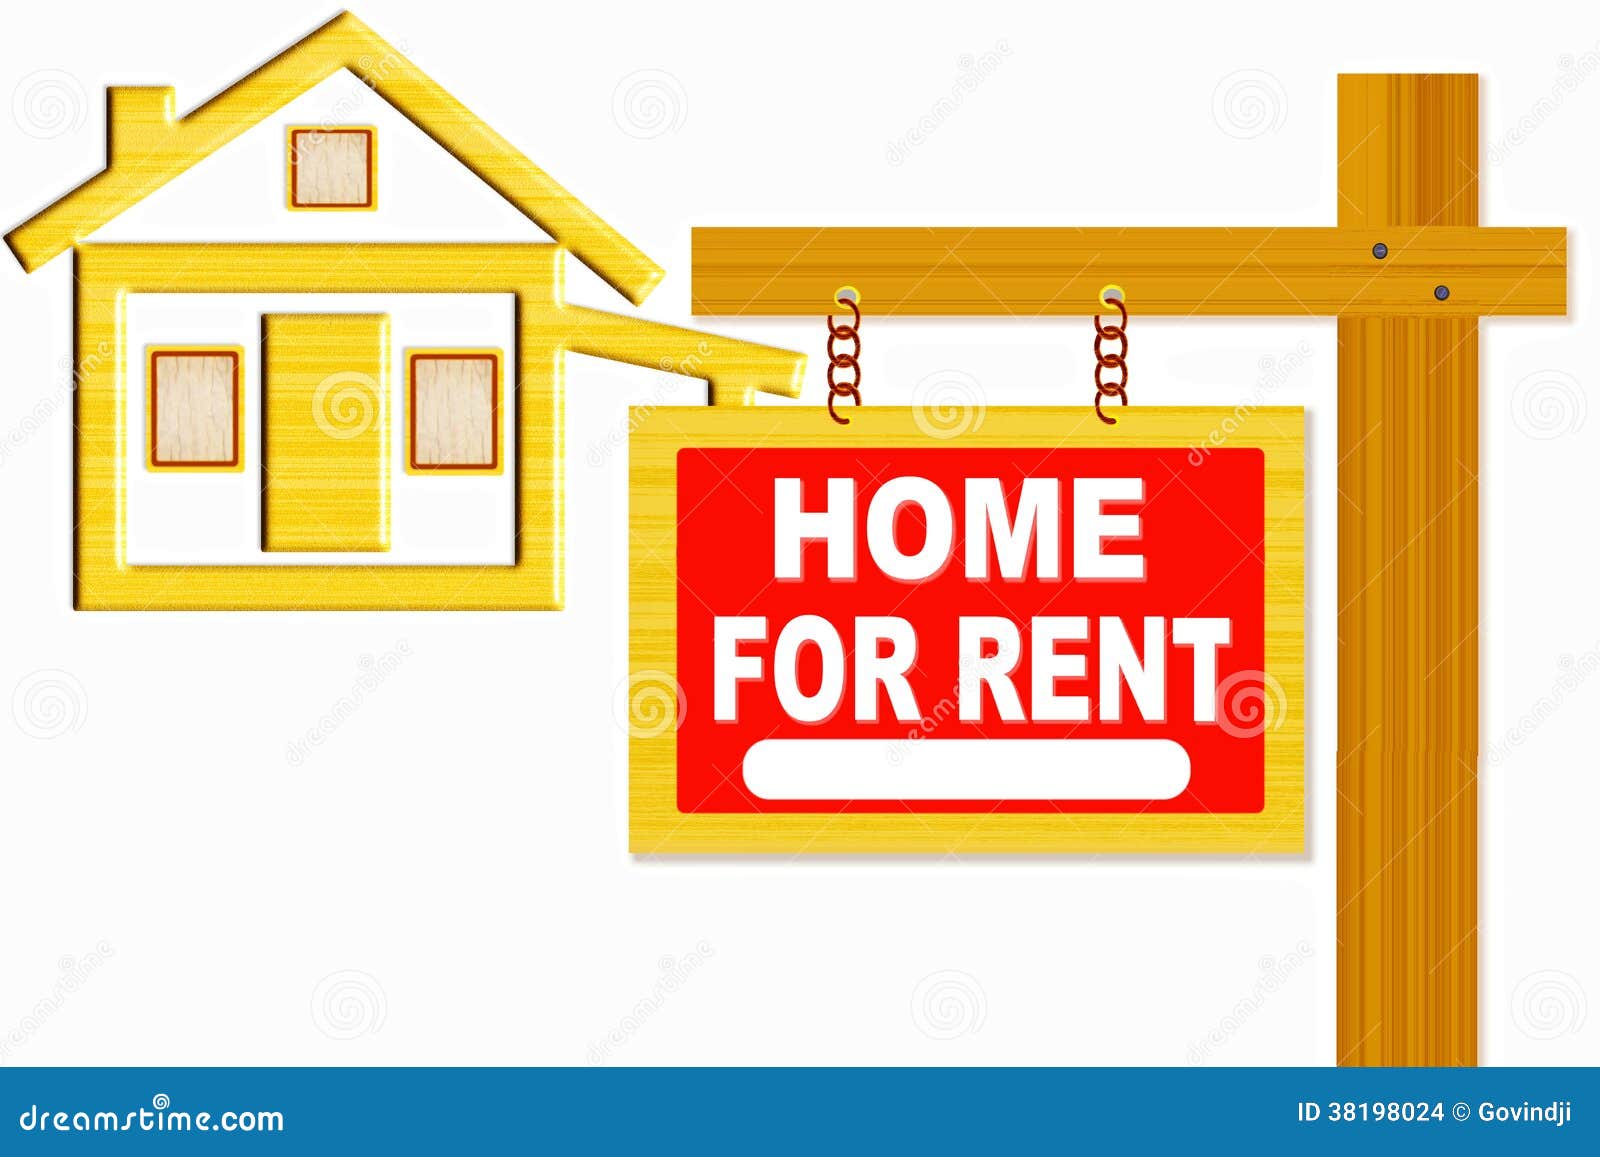 house for rent clipart - photo #11